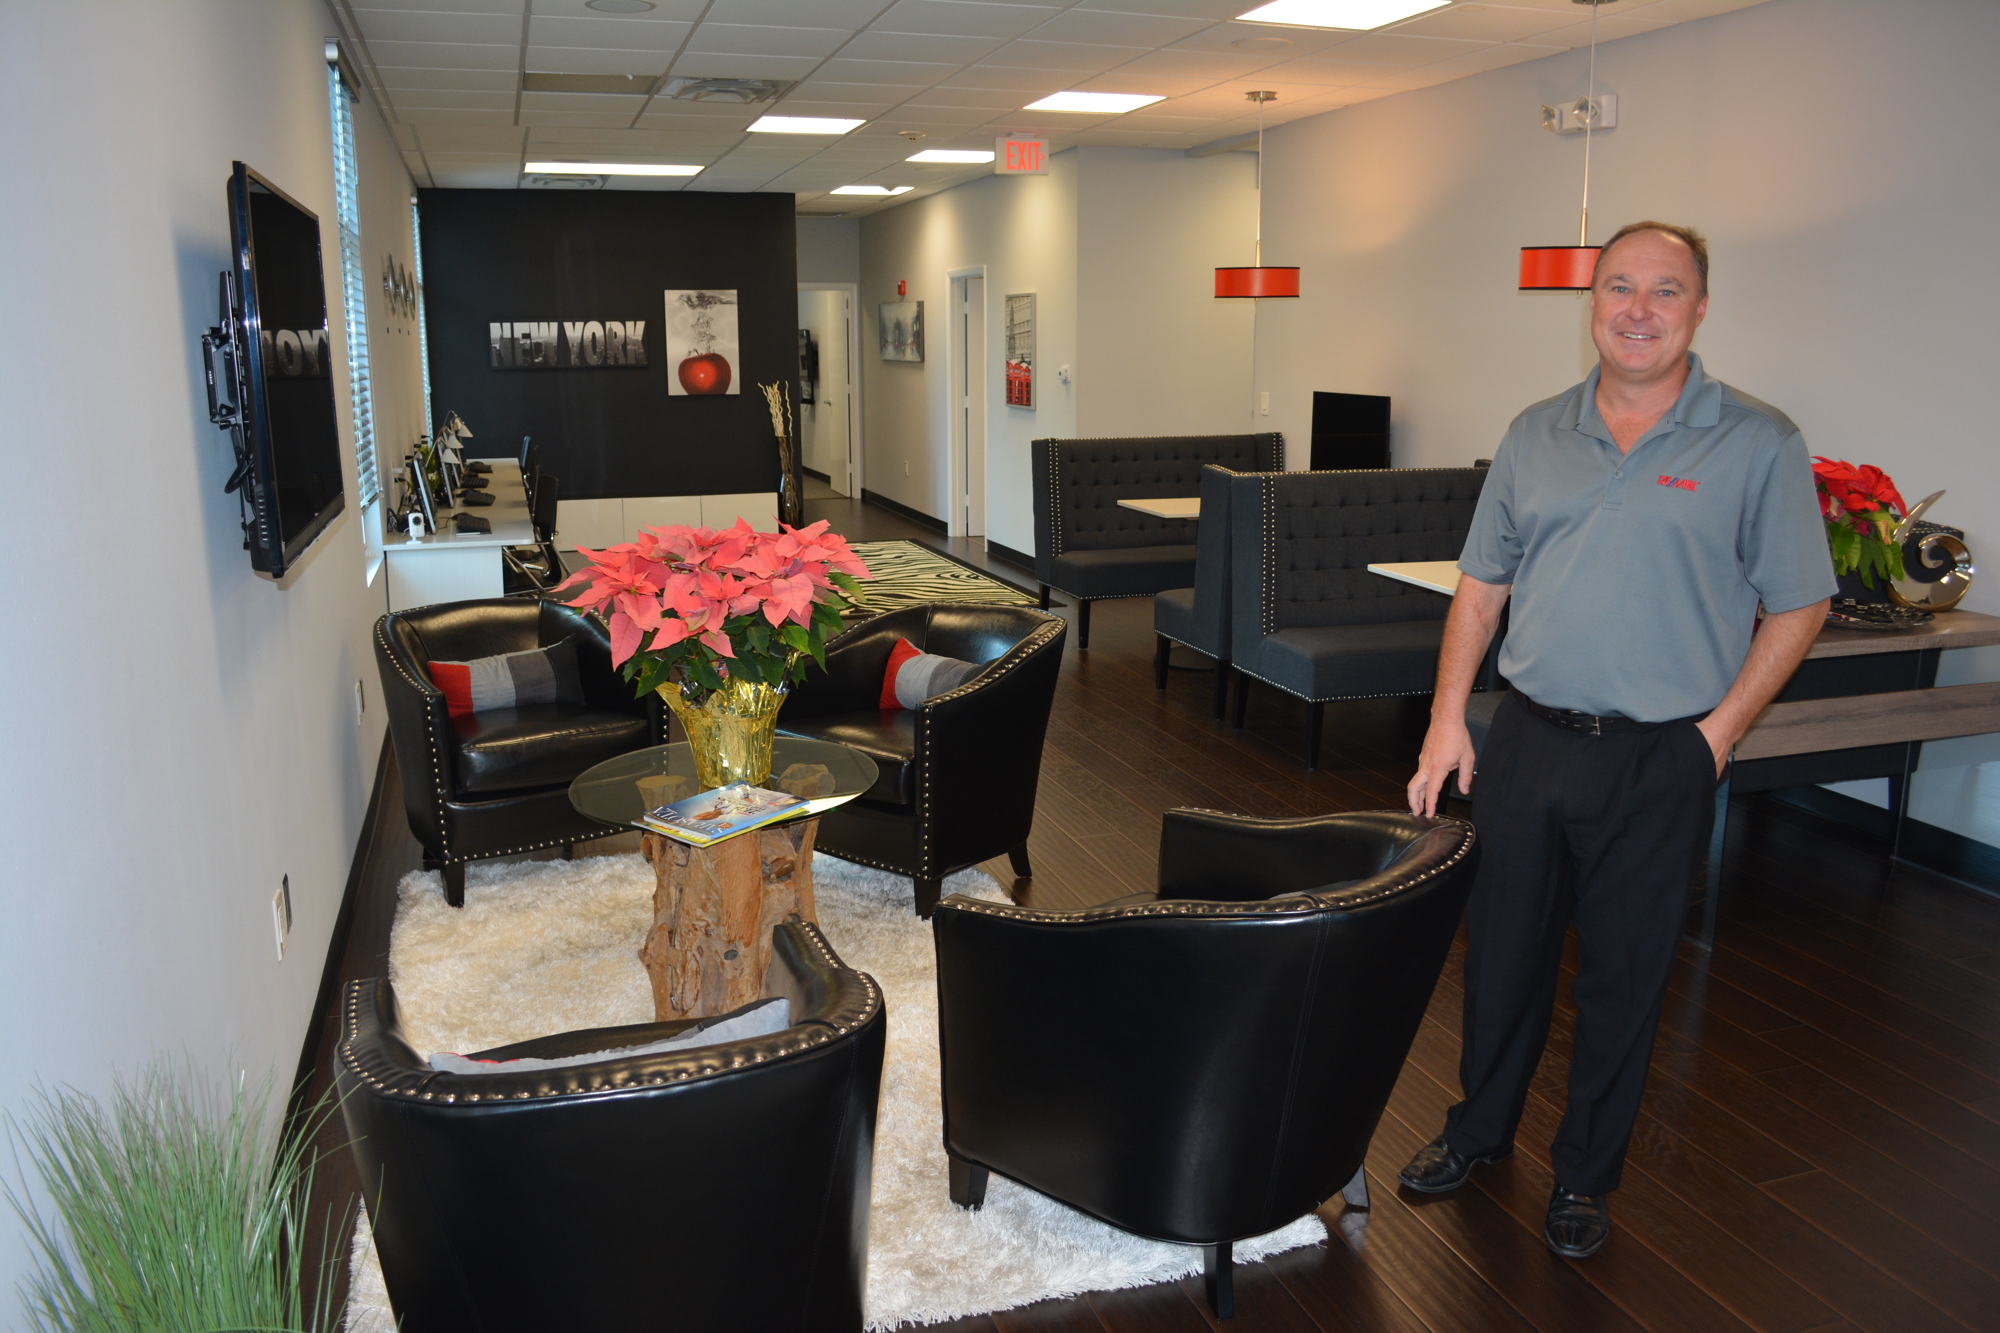 Shaun Peens, the broker and owner of RE/MAX Fine Properties in Lakewood Ranch, shows off the cafe-style office that is designed to attract younger clients.